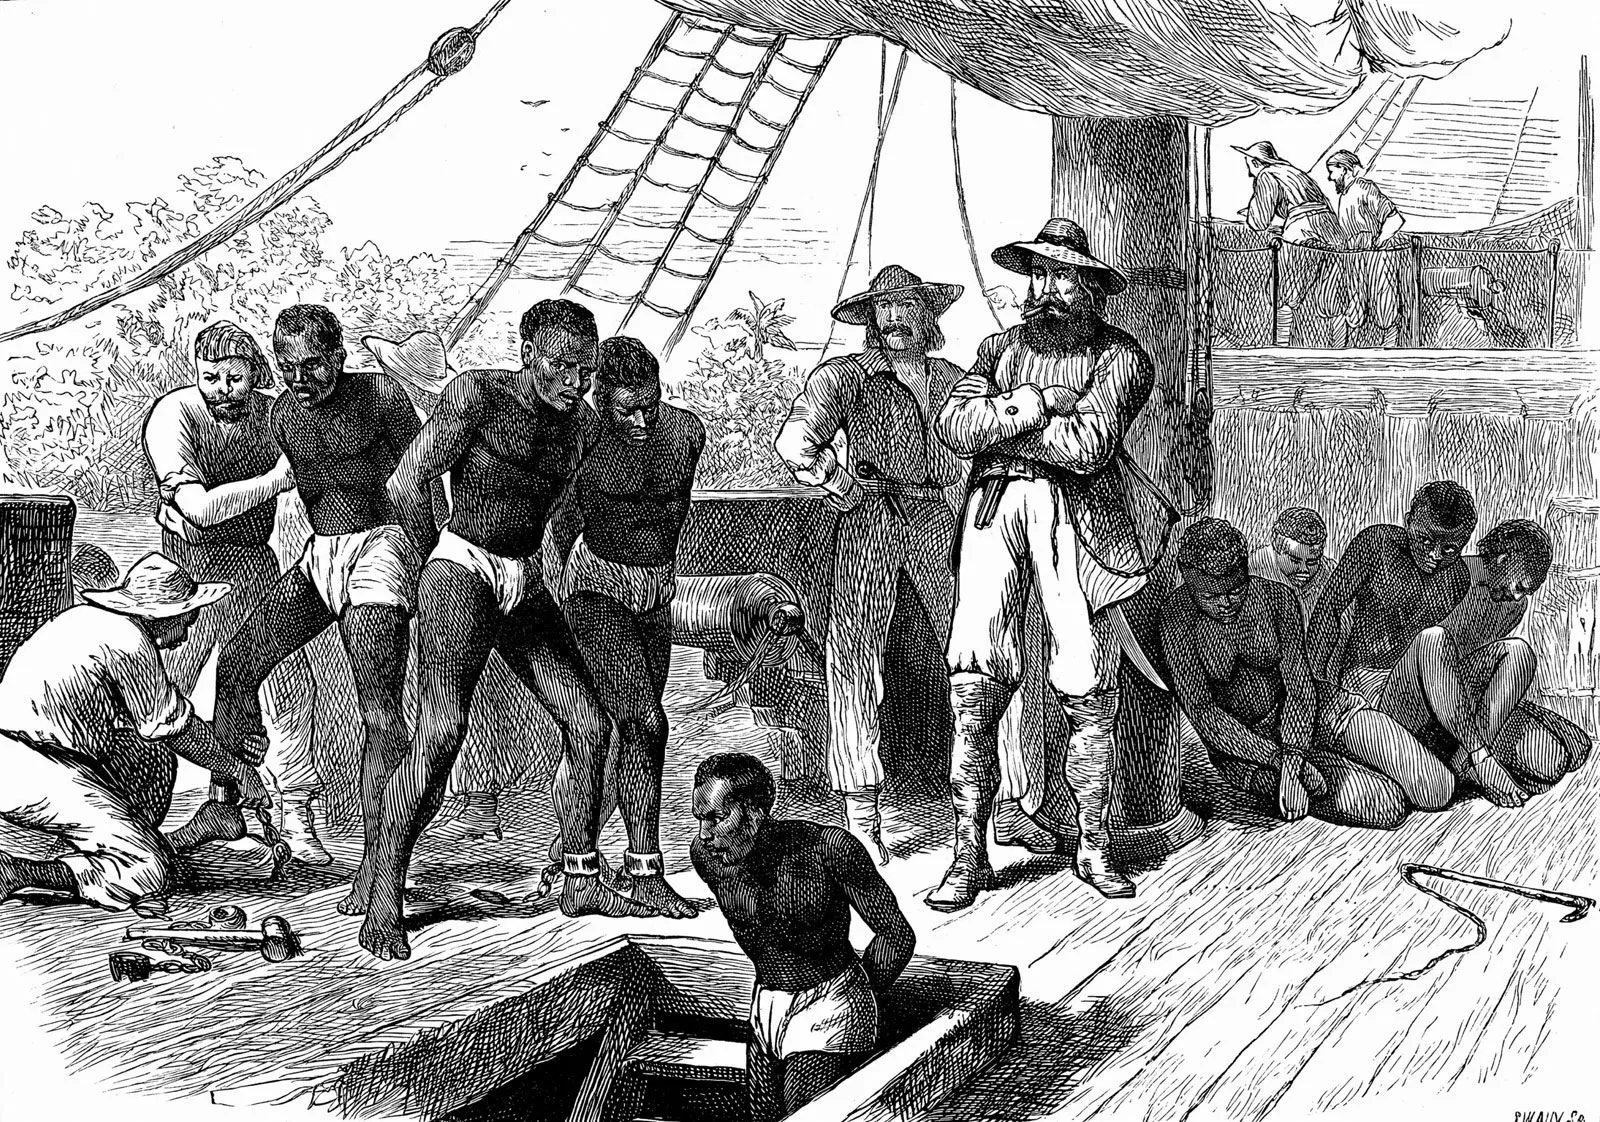 transatlantic slave trade of the igbos through the middle passage